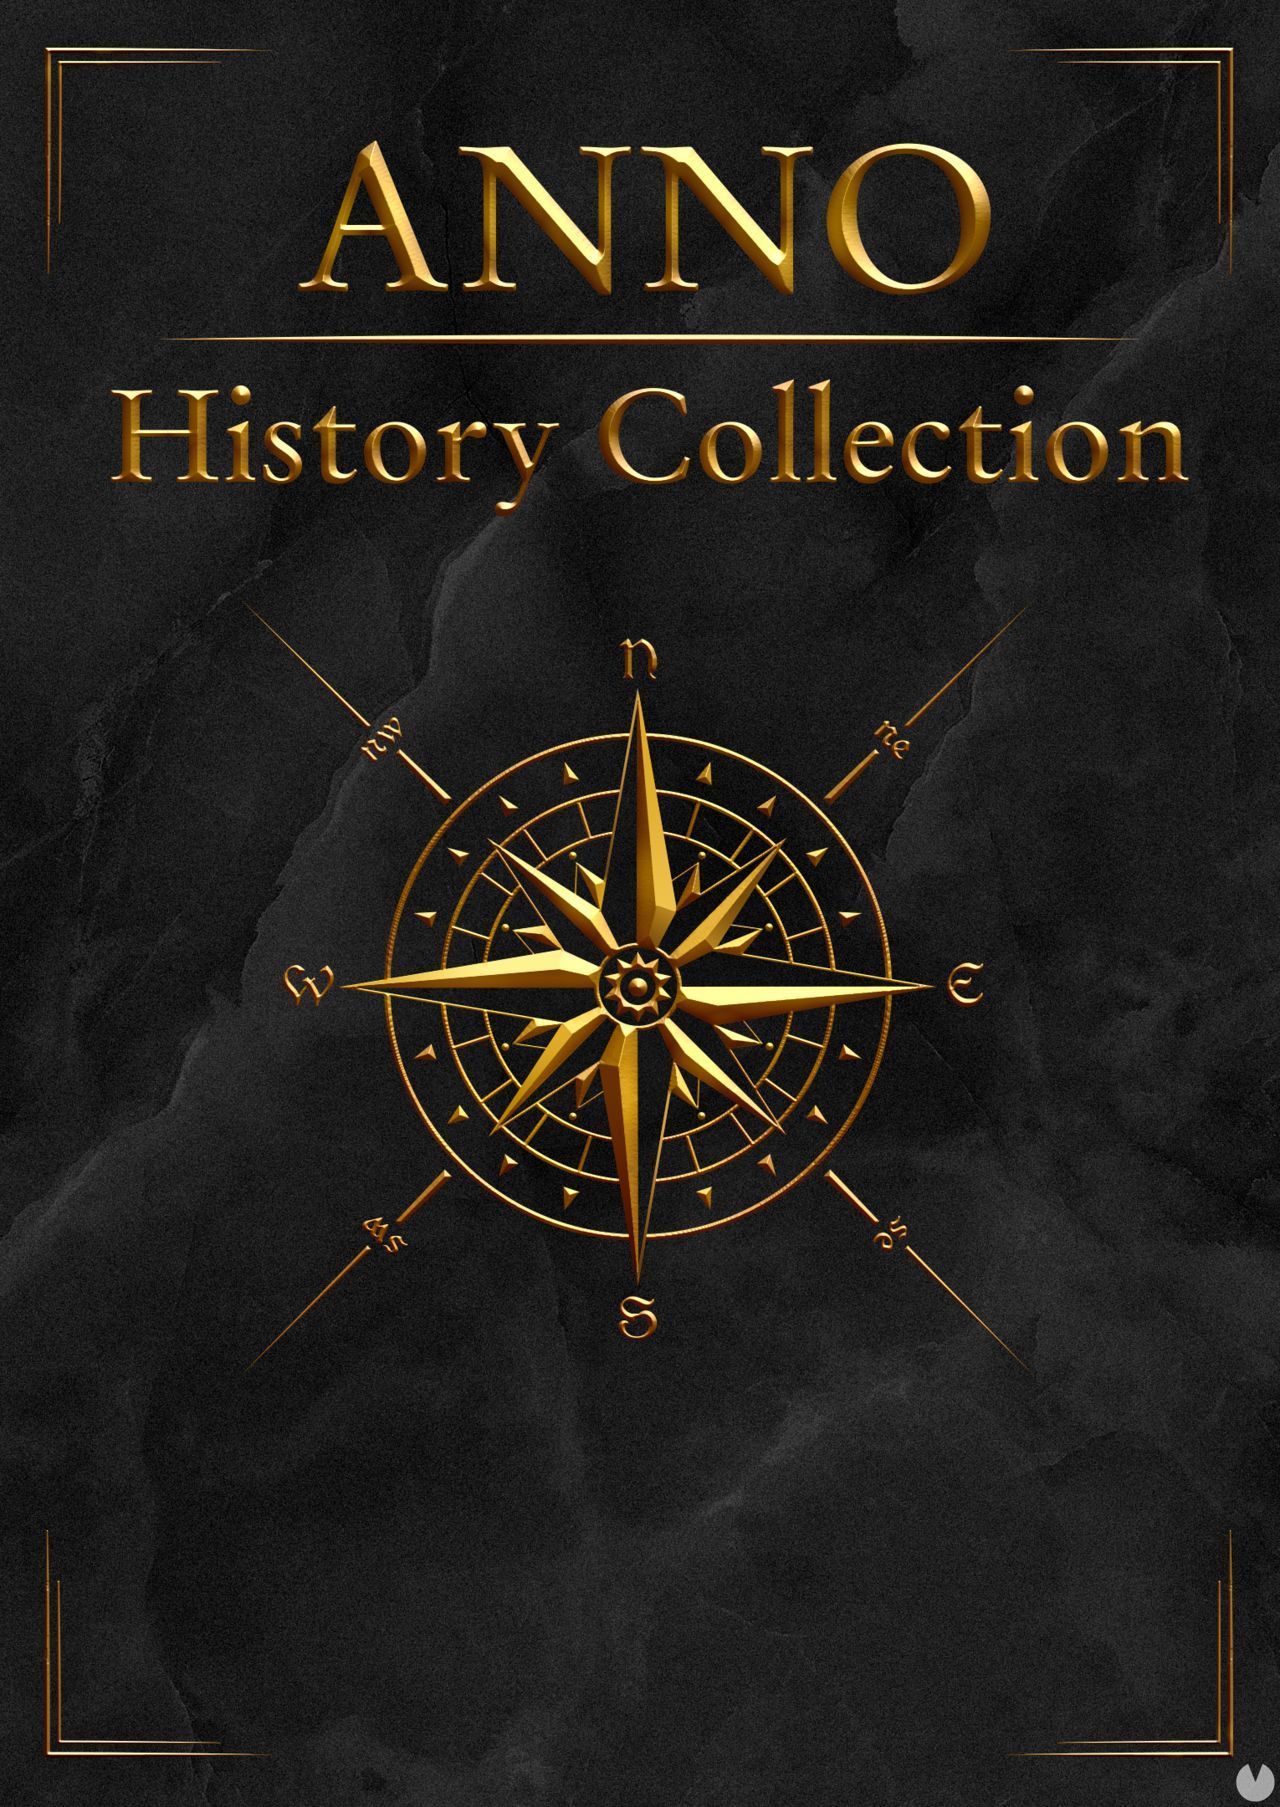 Anno History Collection - Videojuego (PC) - Vandal